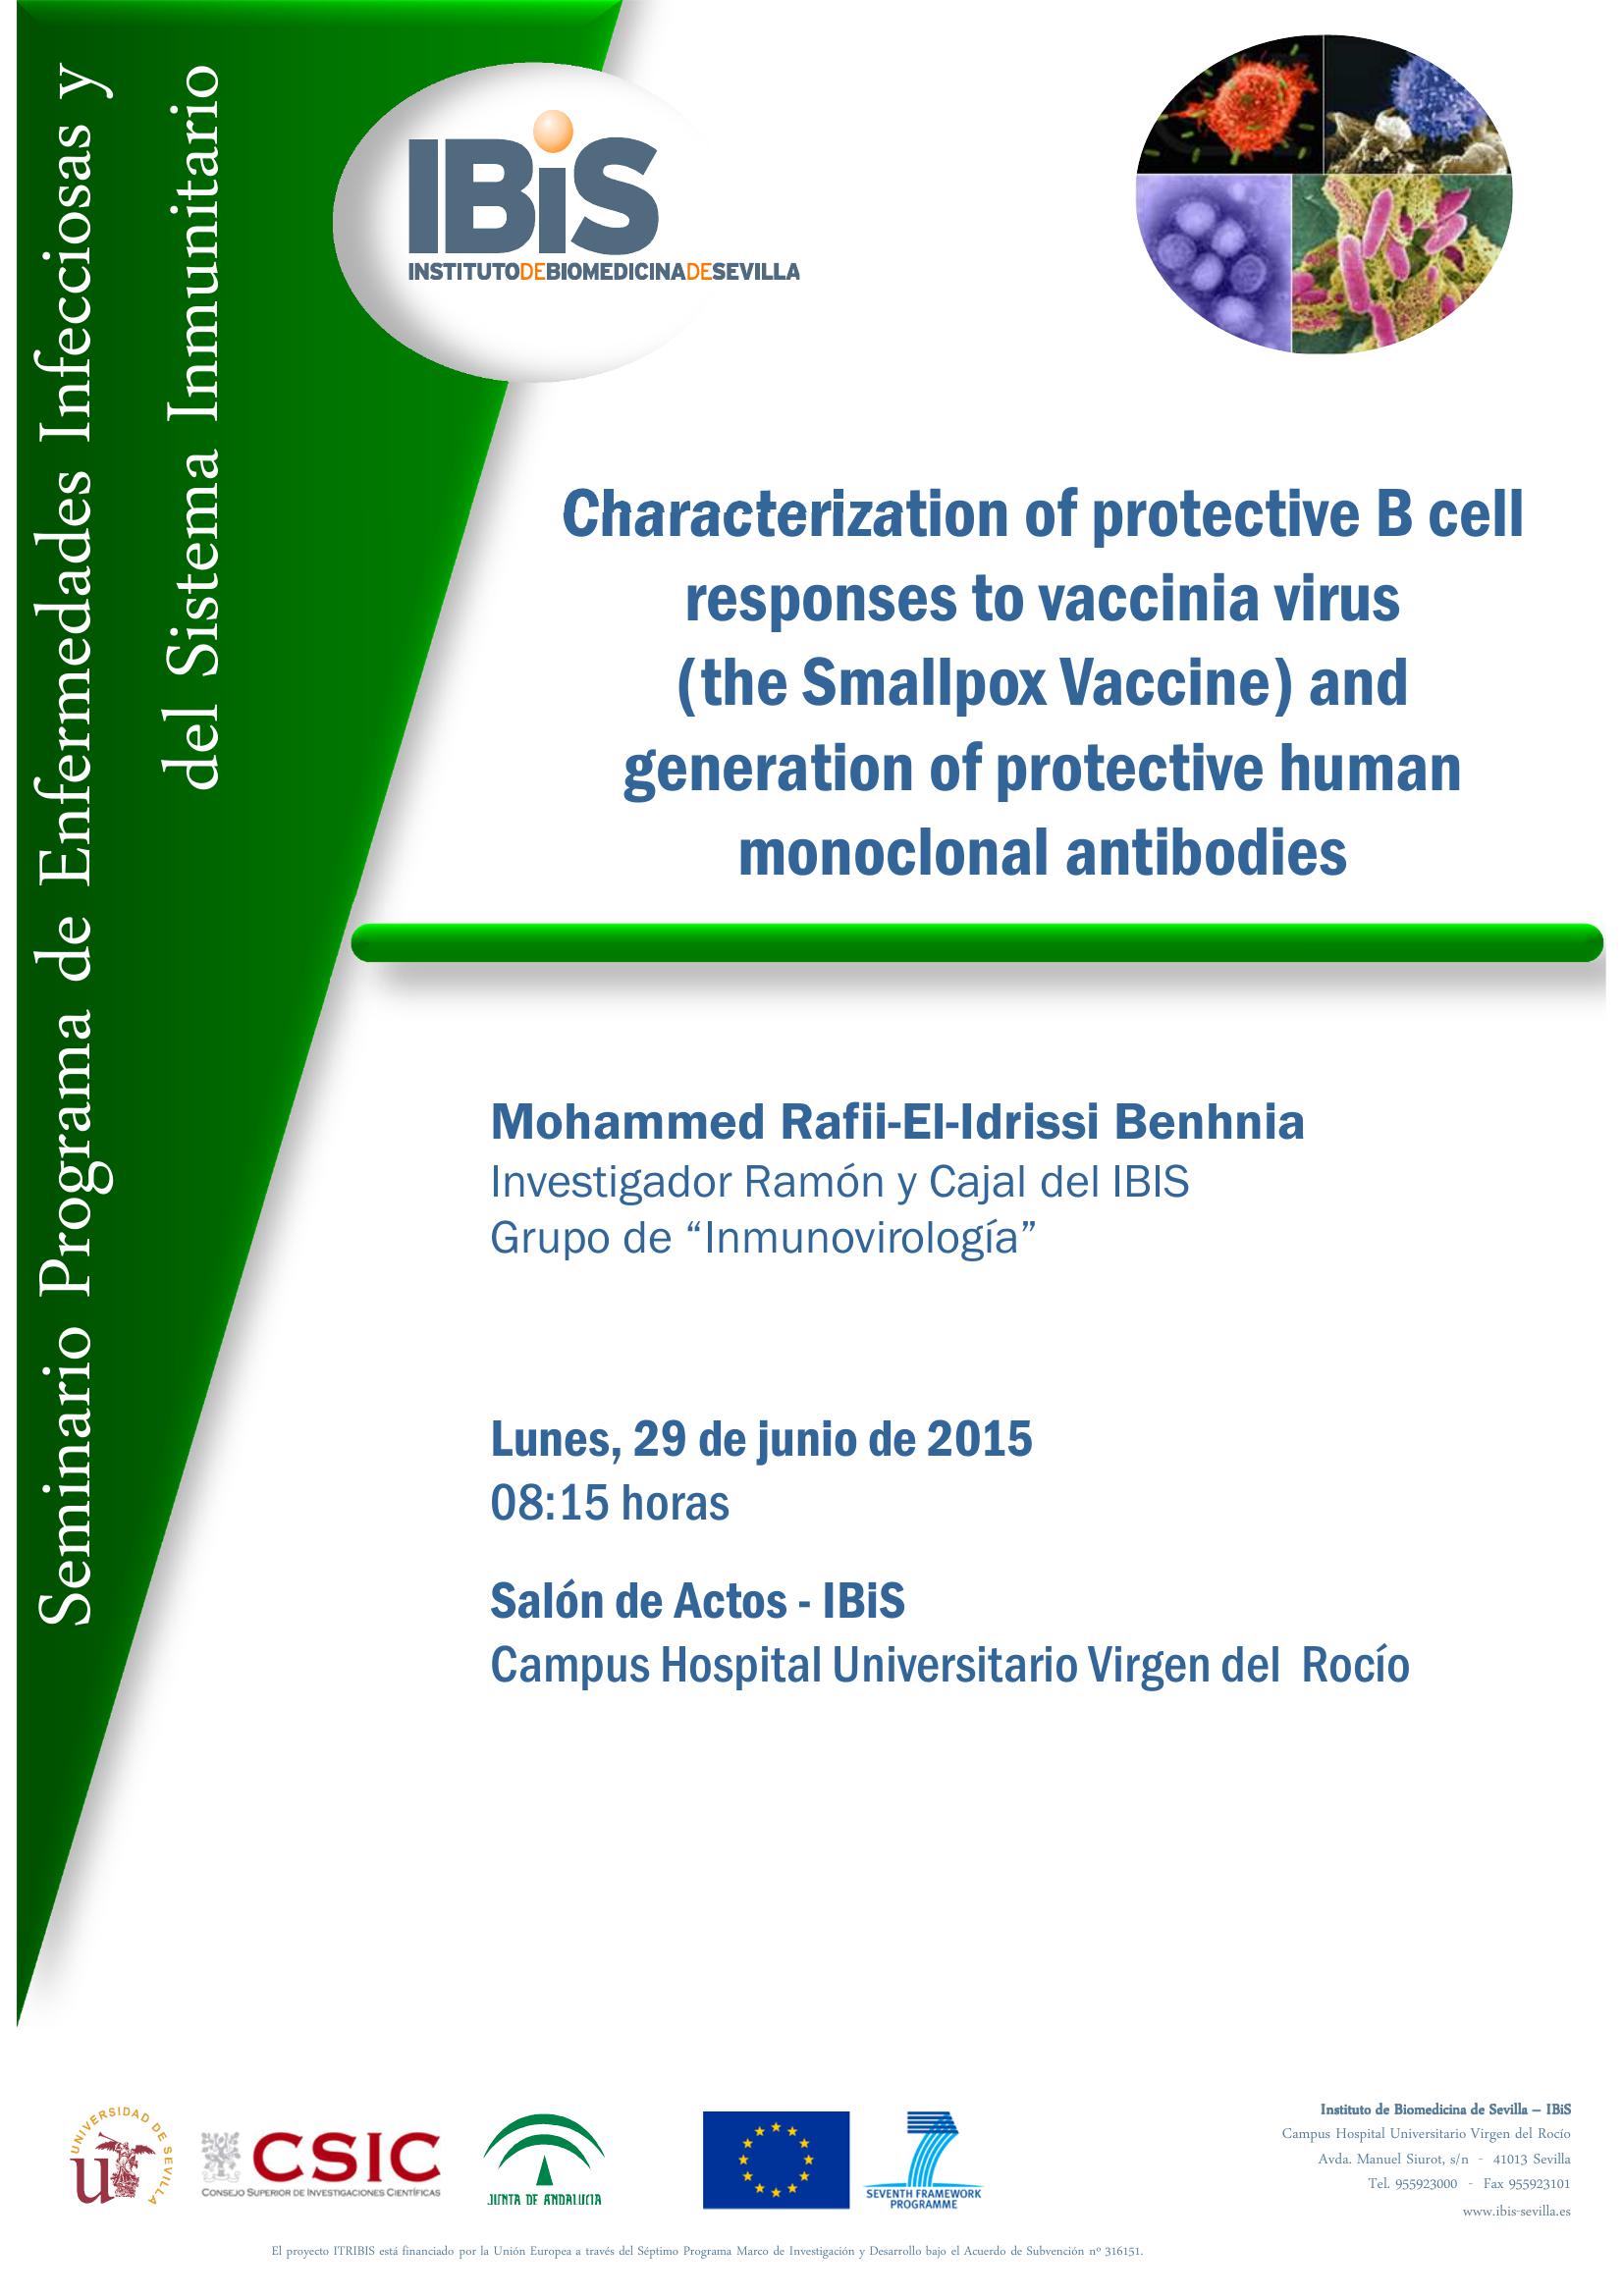 Poster: Characterization of protective B cell responses to vaccinia virus  (the Smallpox Vaccine) and  generation of protective human monoclonal antibodies